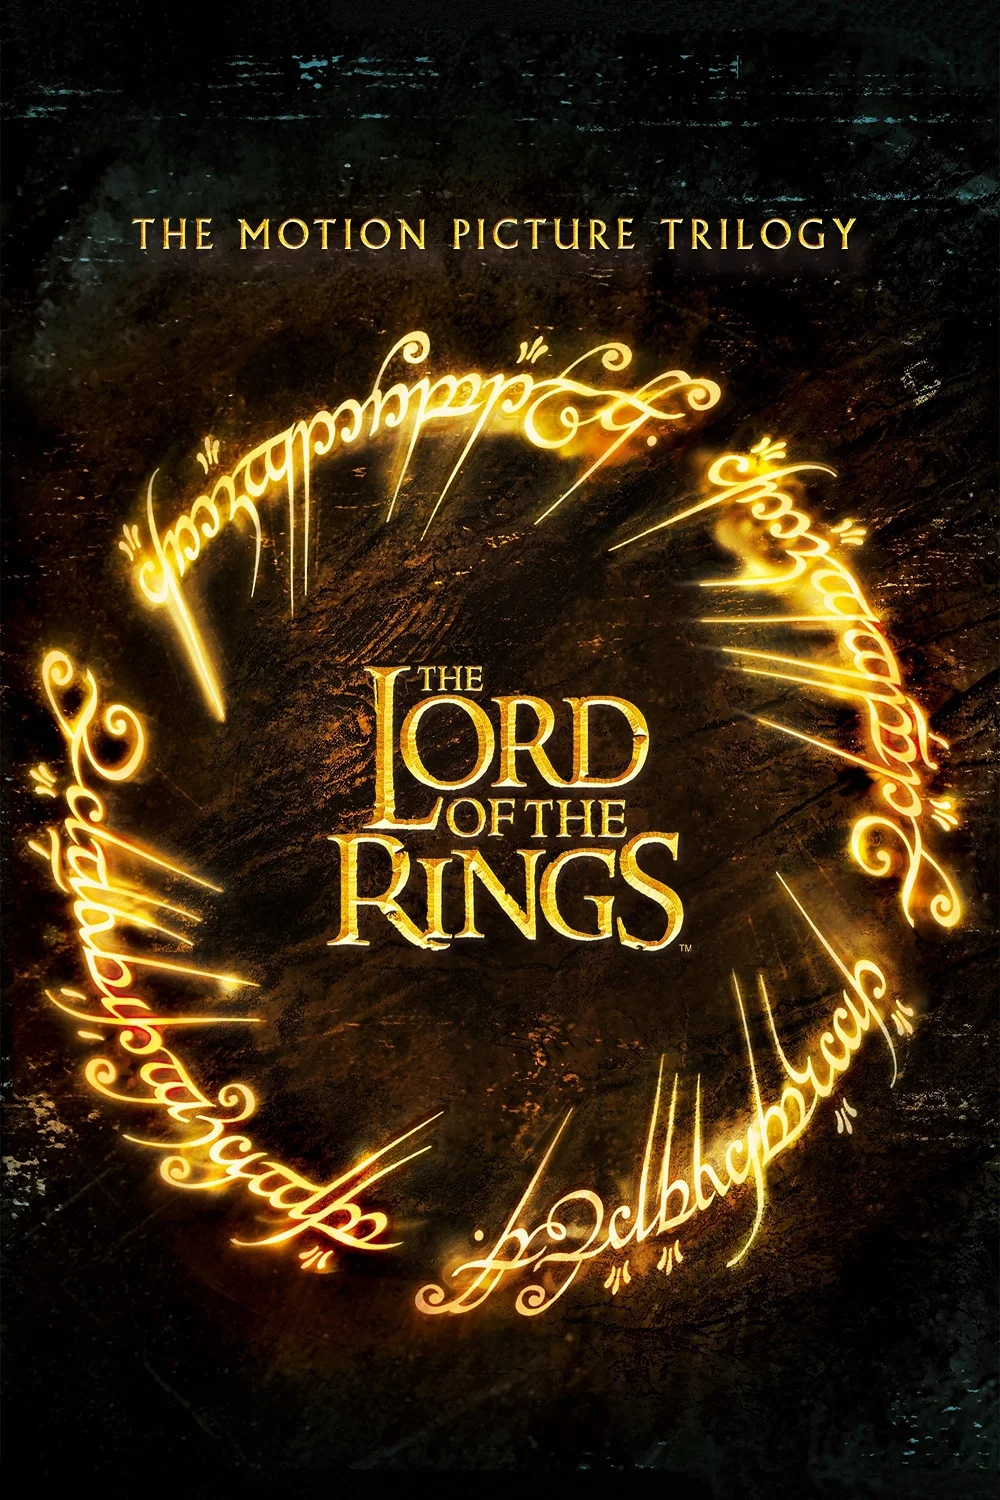 The Lord of the Rings Extended Edition Marathon